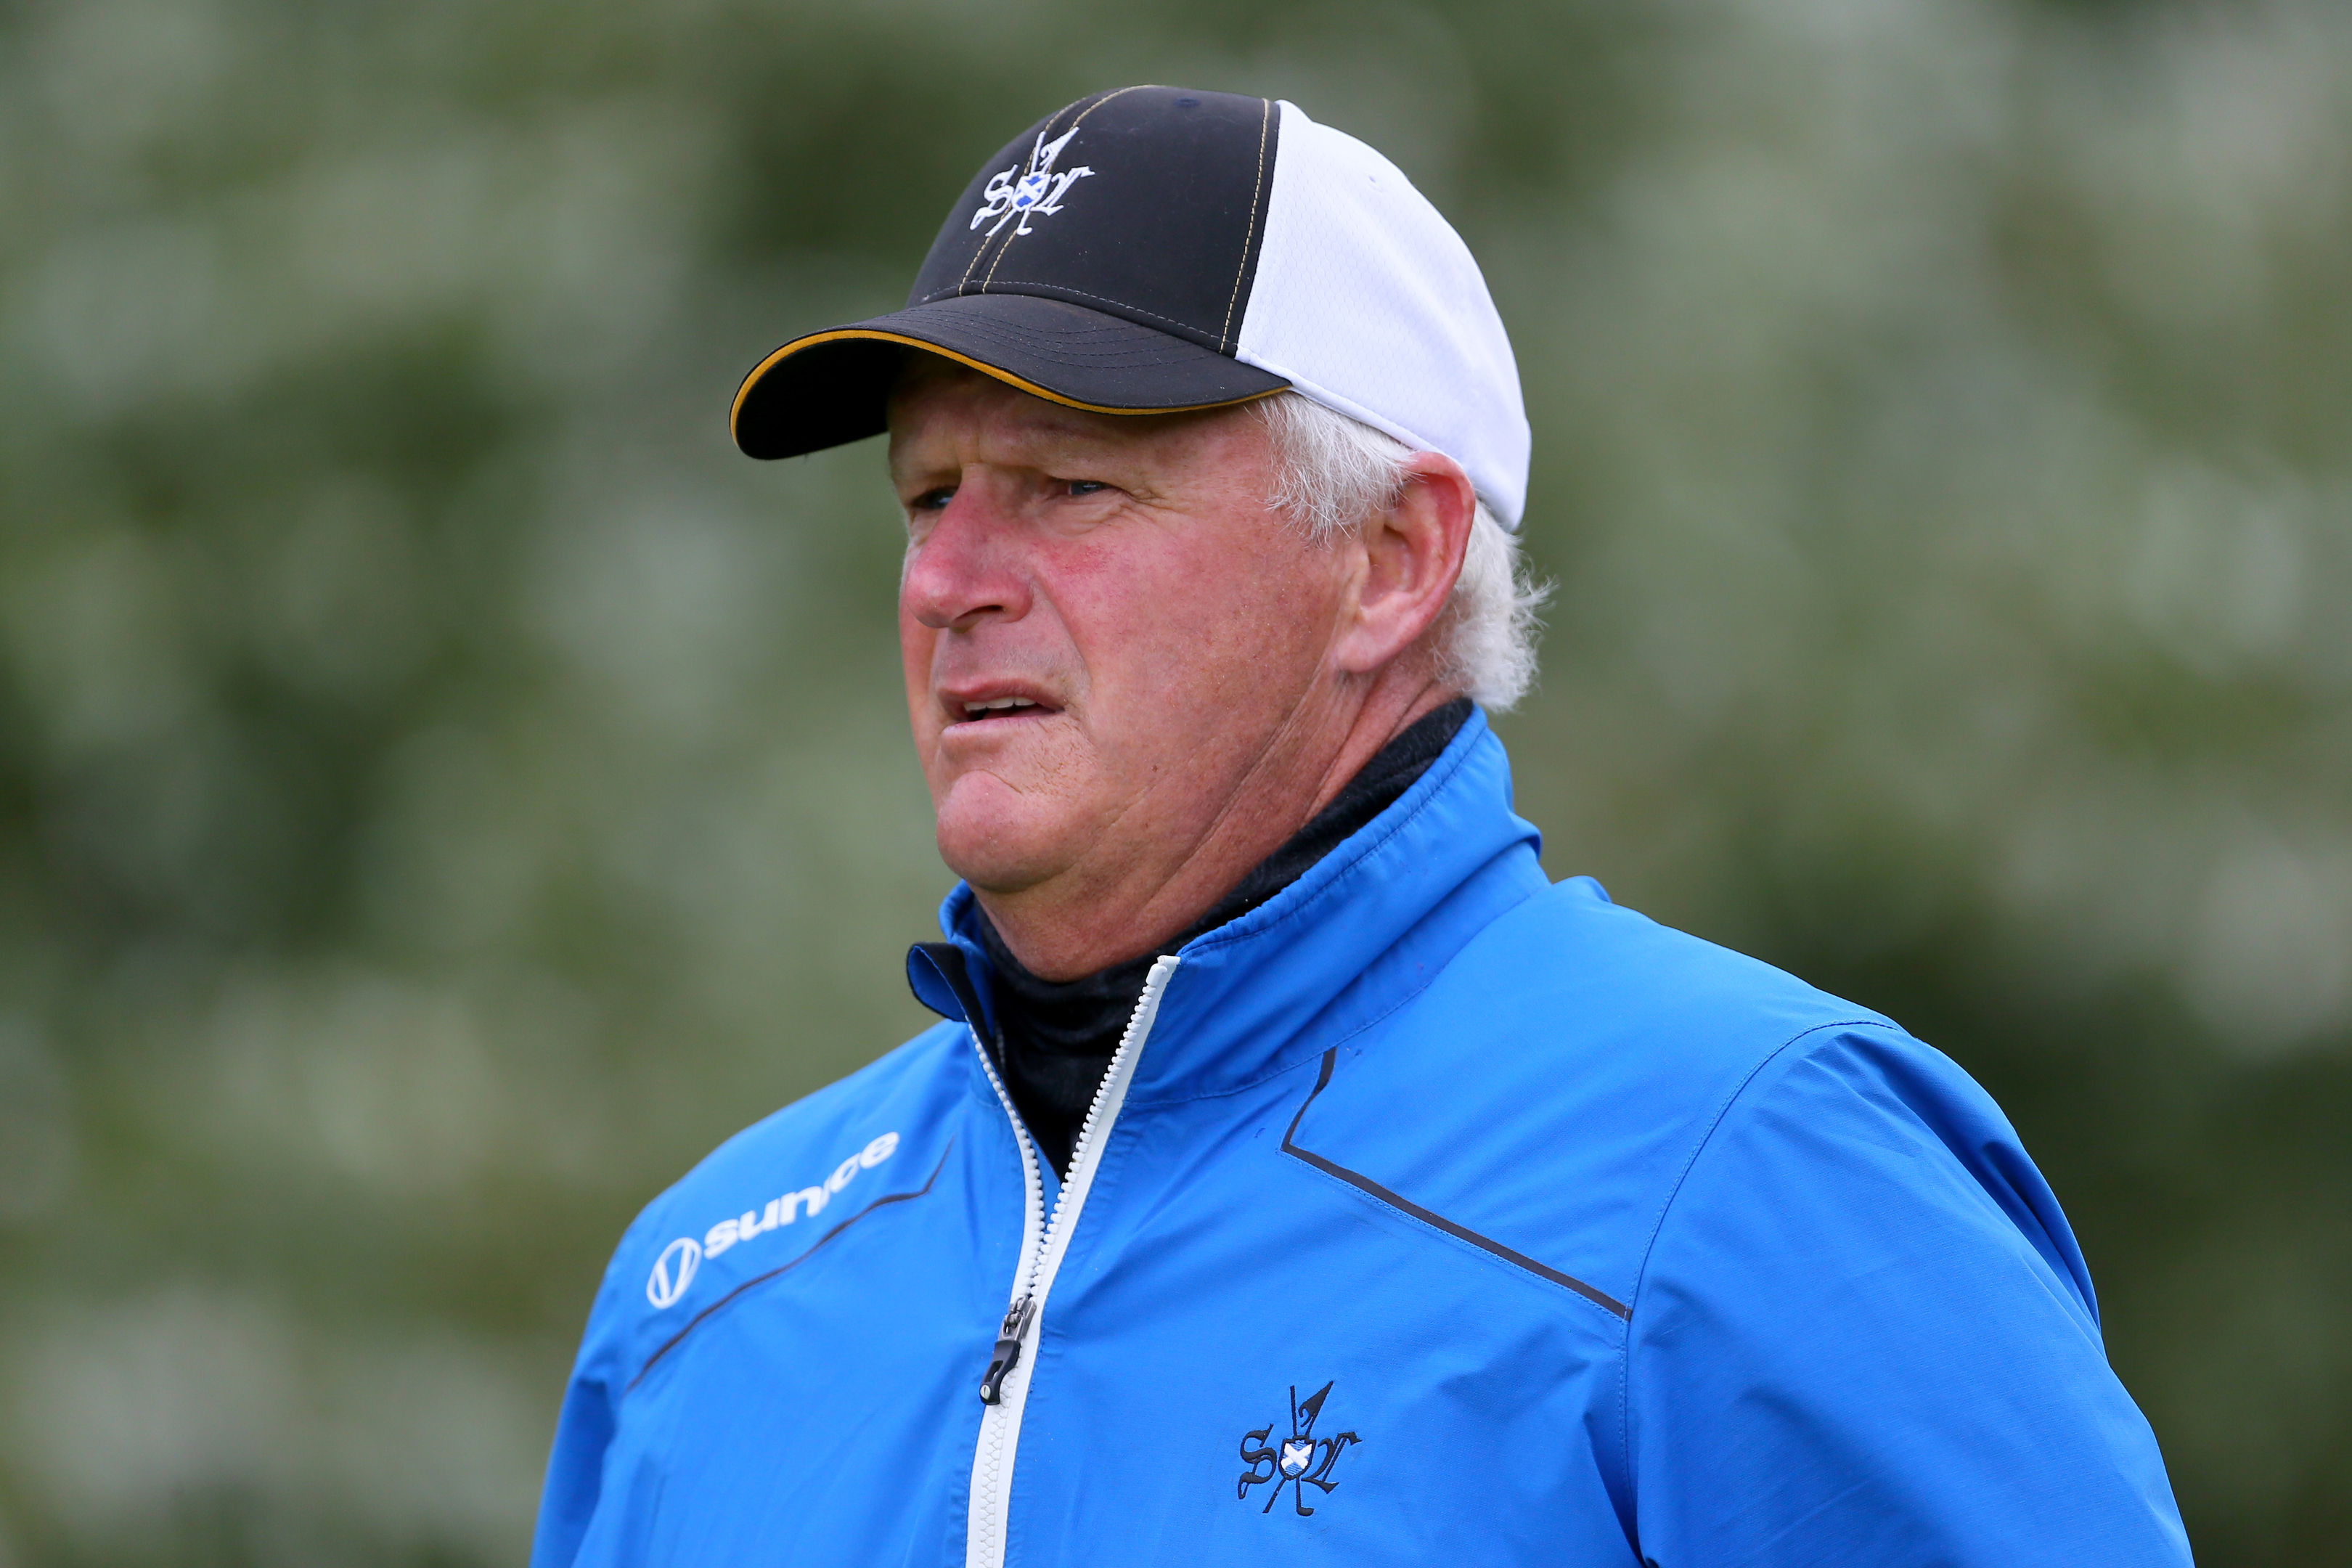 Sandy Lyle will hit the first shot of the 147th Open at Carnoustie.